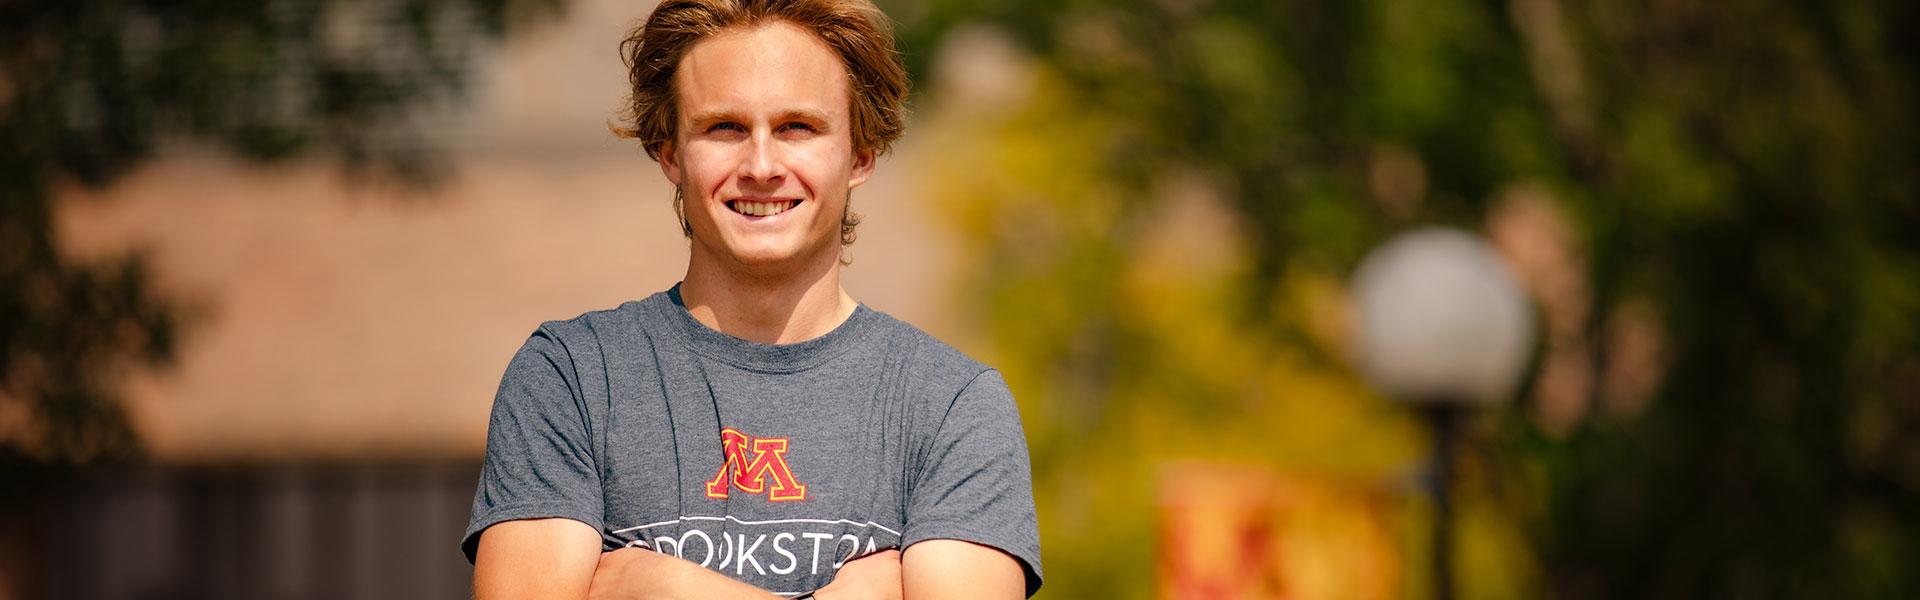 Male student standing with arms crossed with UMN Crookston tshirt during the fall